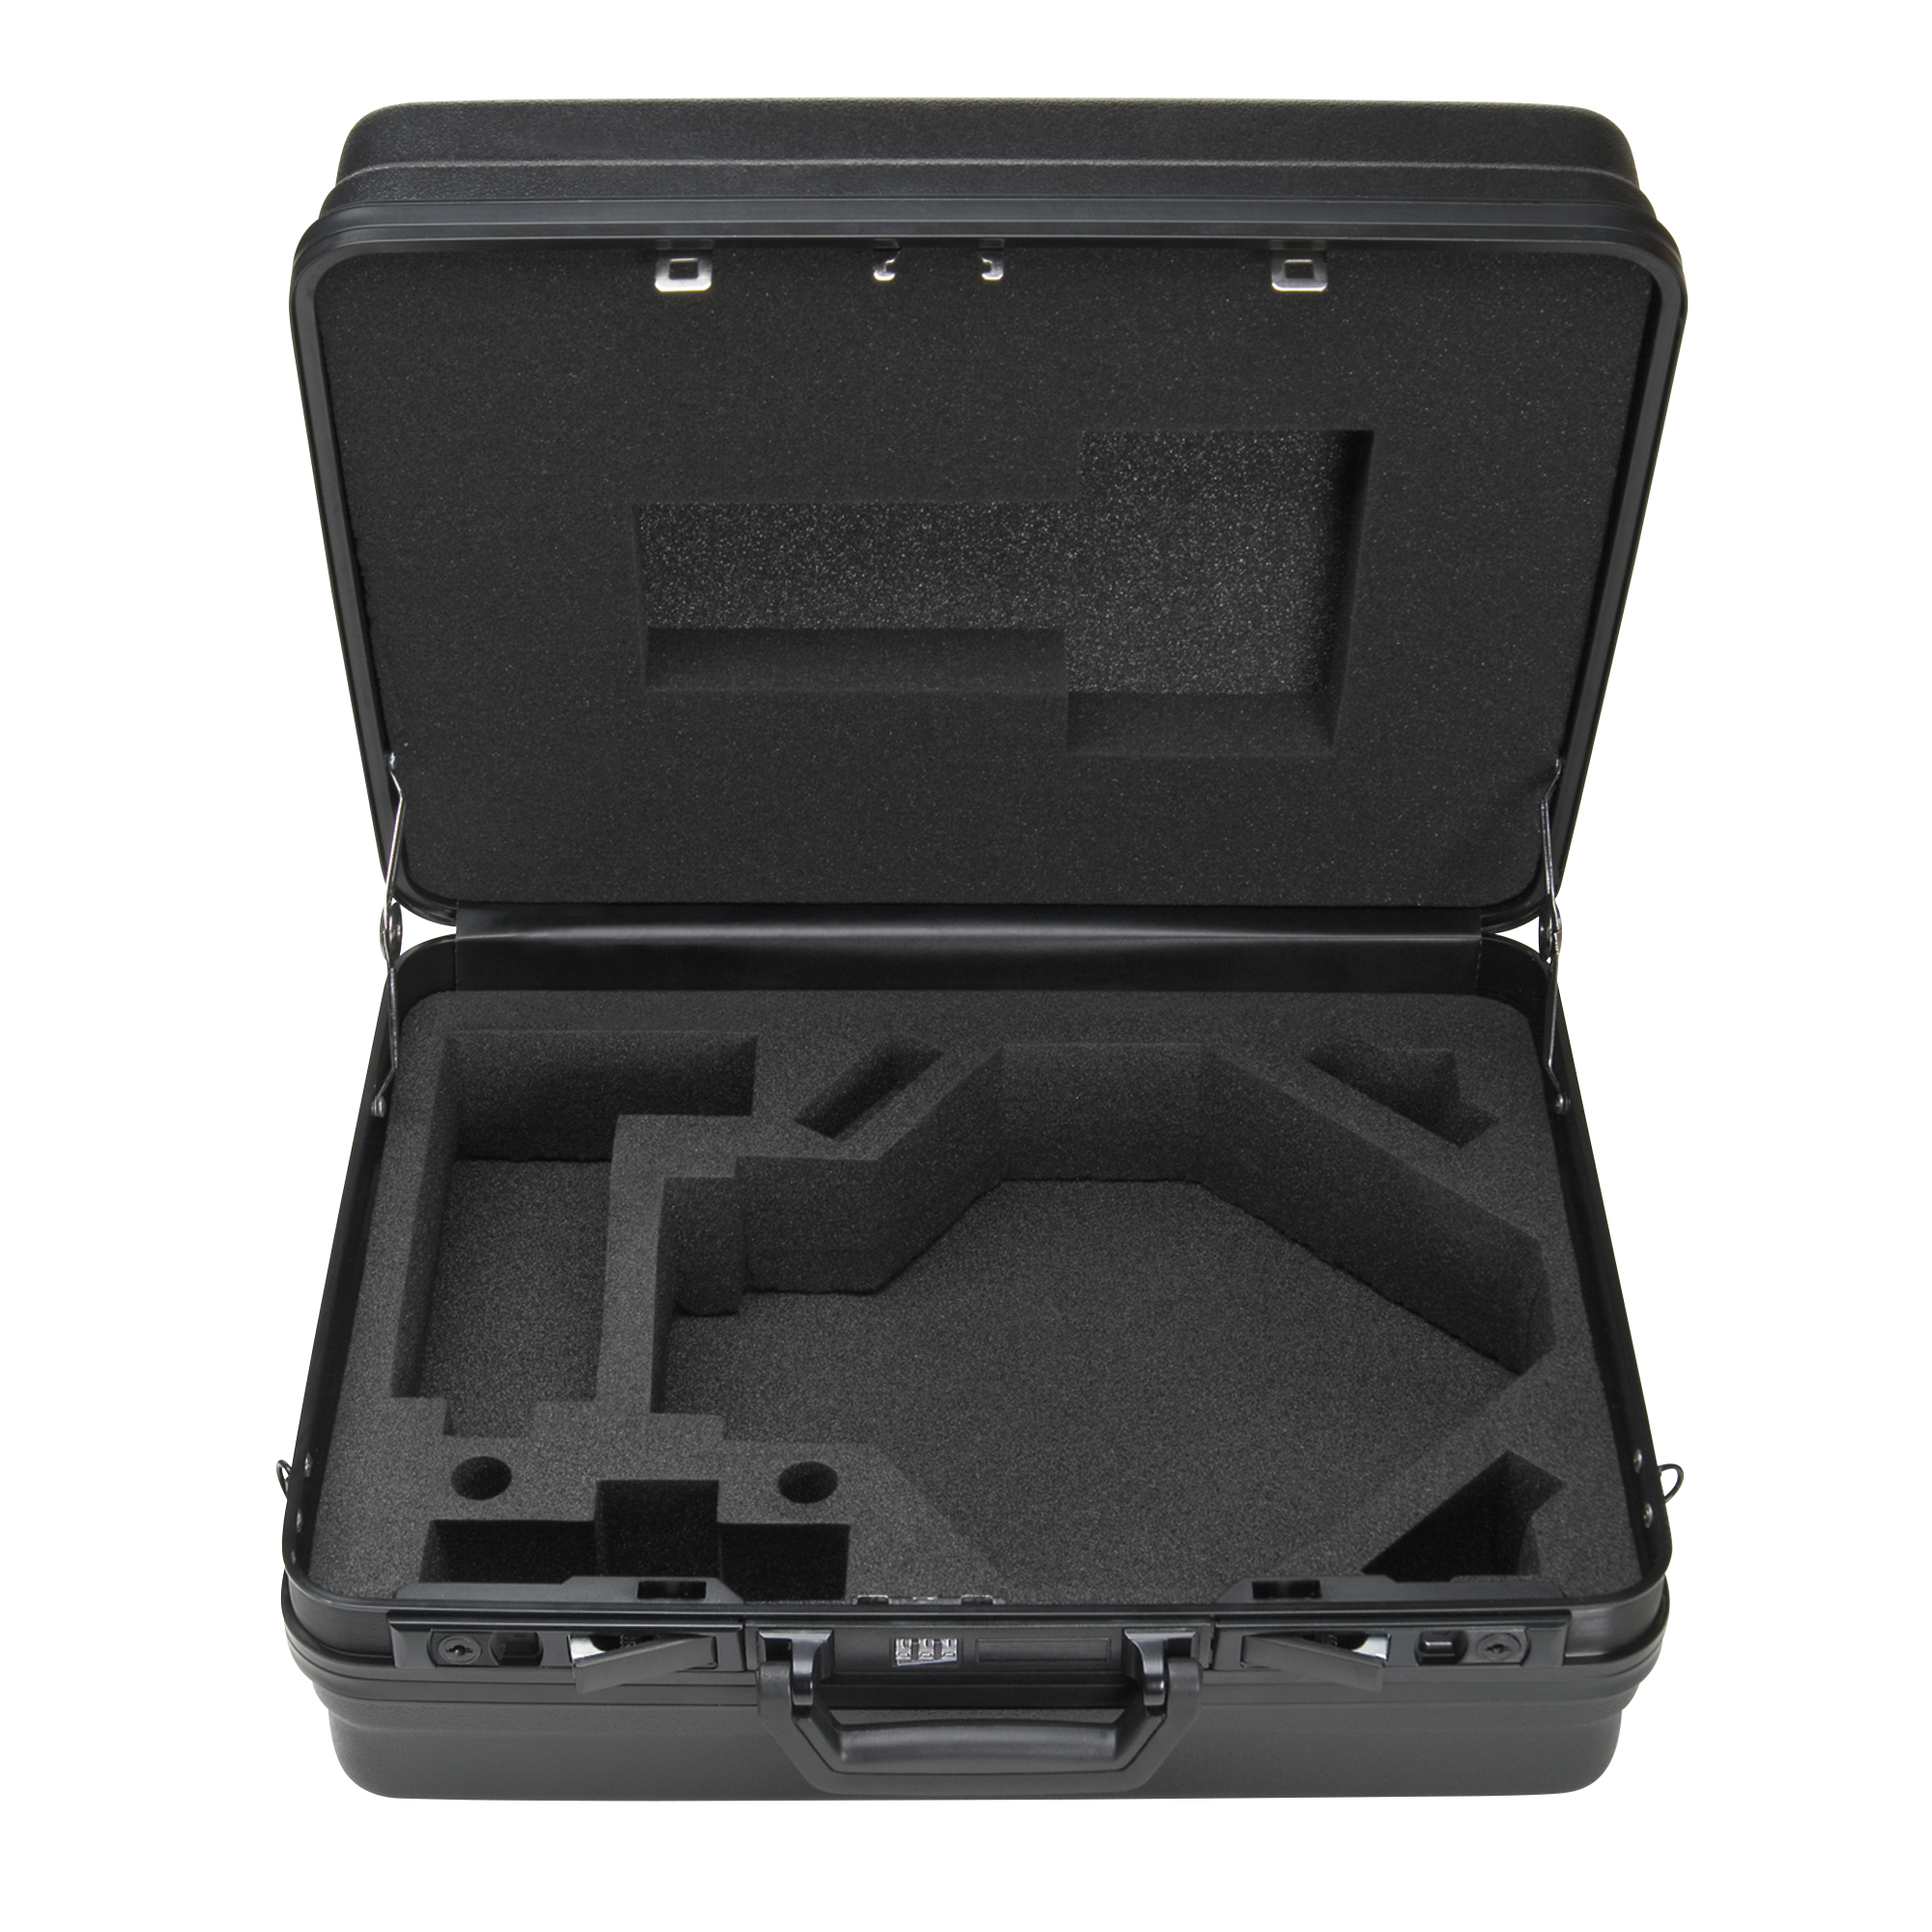 HEINE Hard case for indirect ophthalmology sets C-283 and C-284